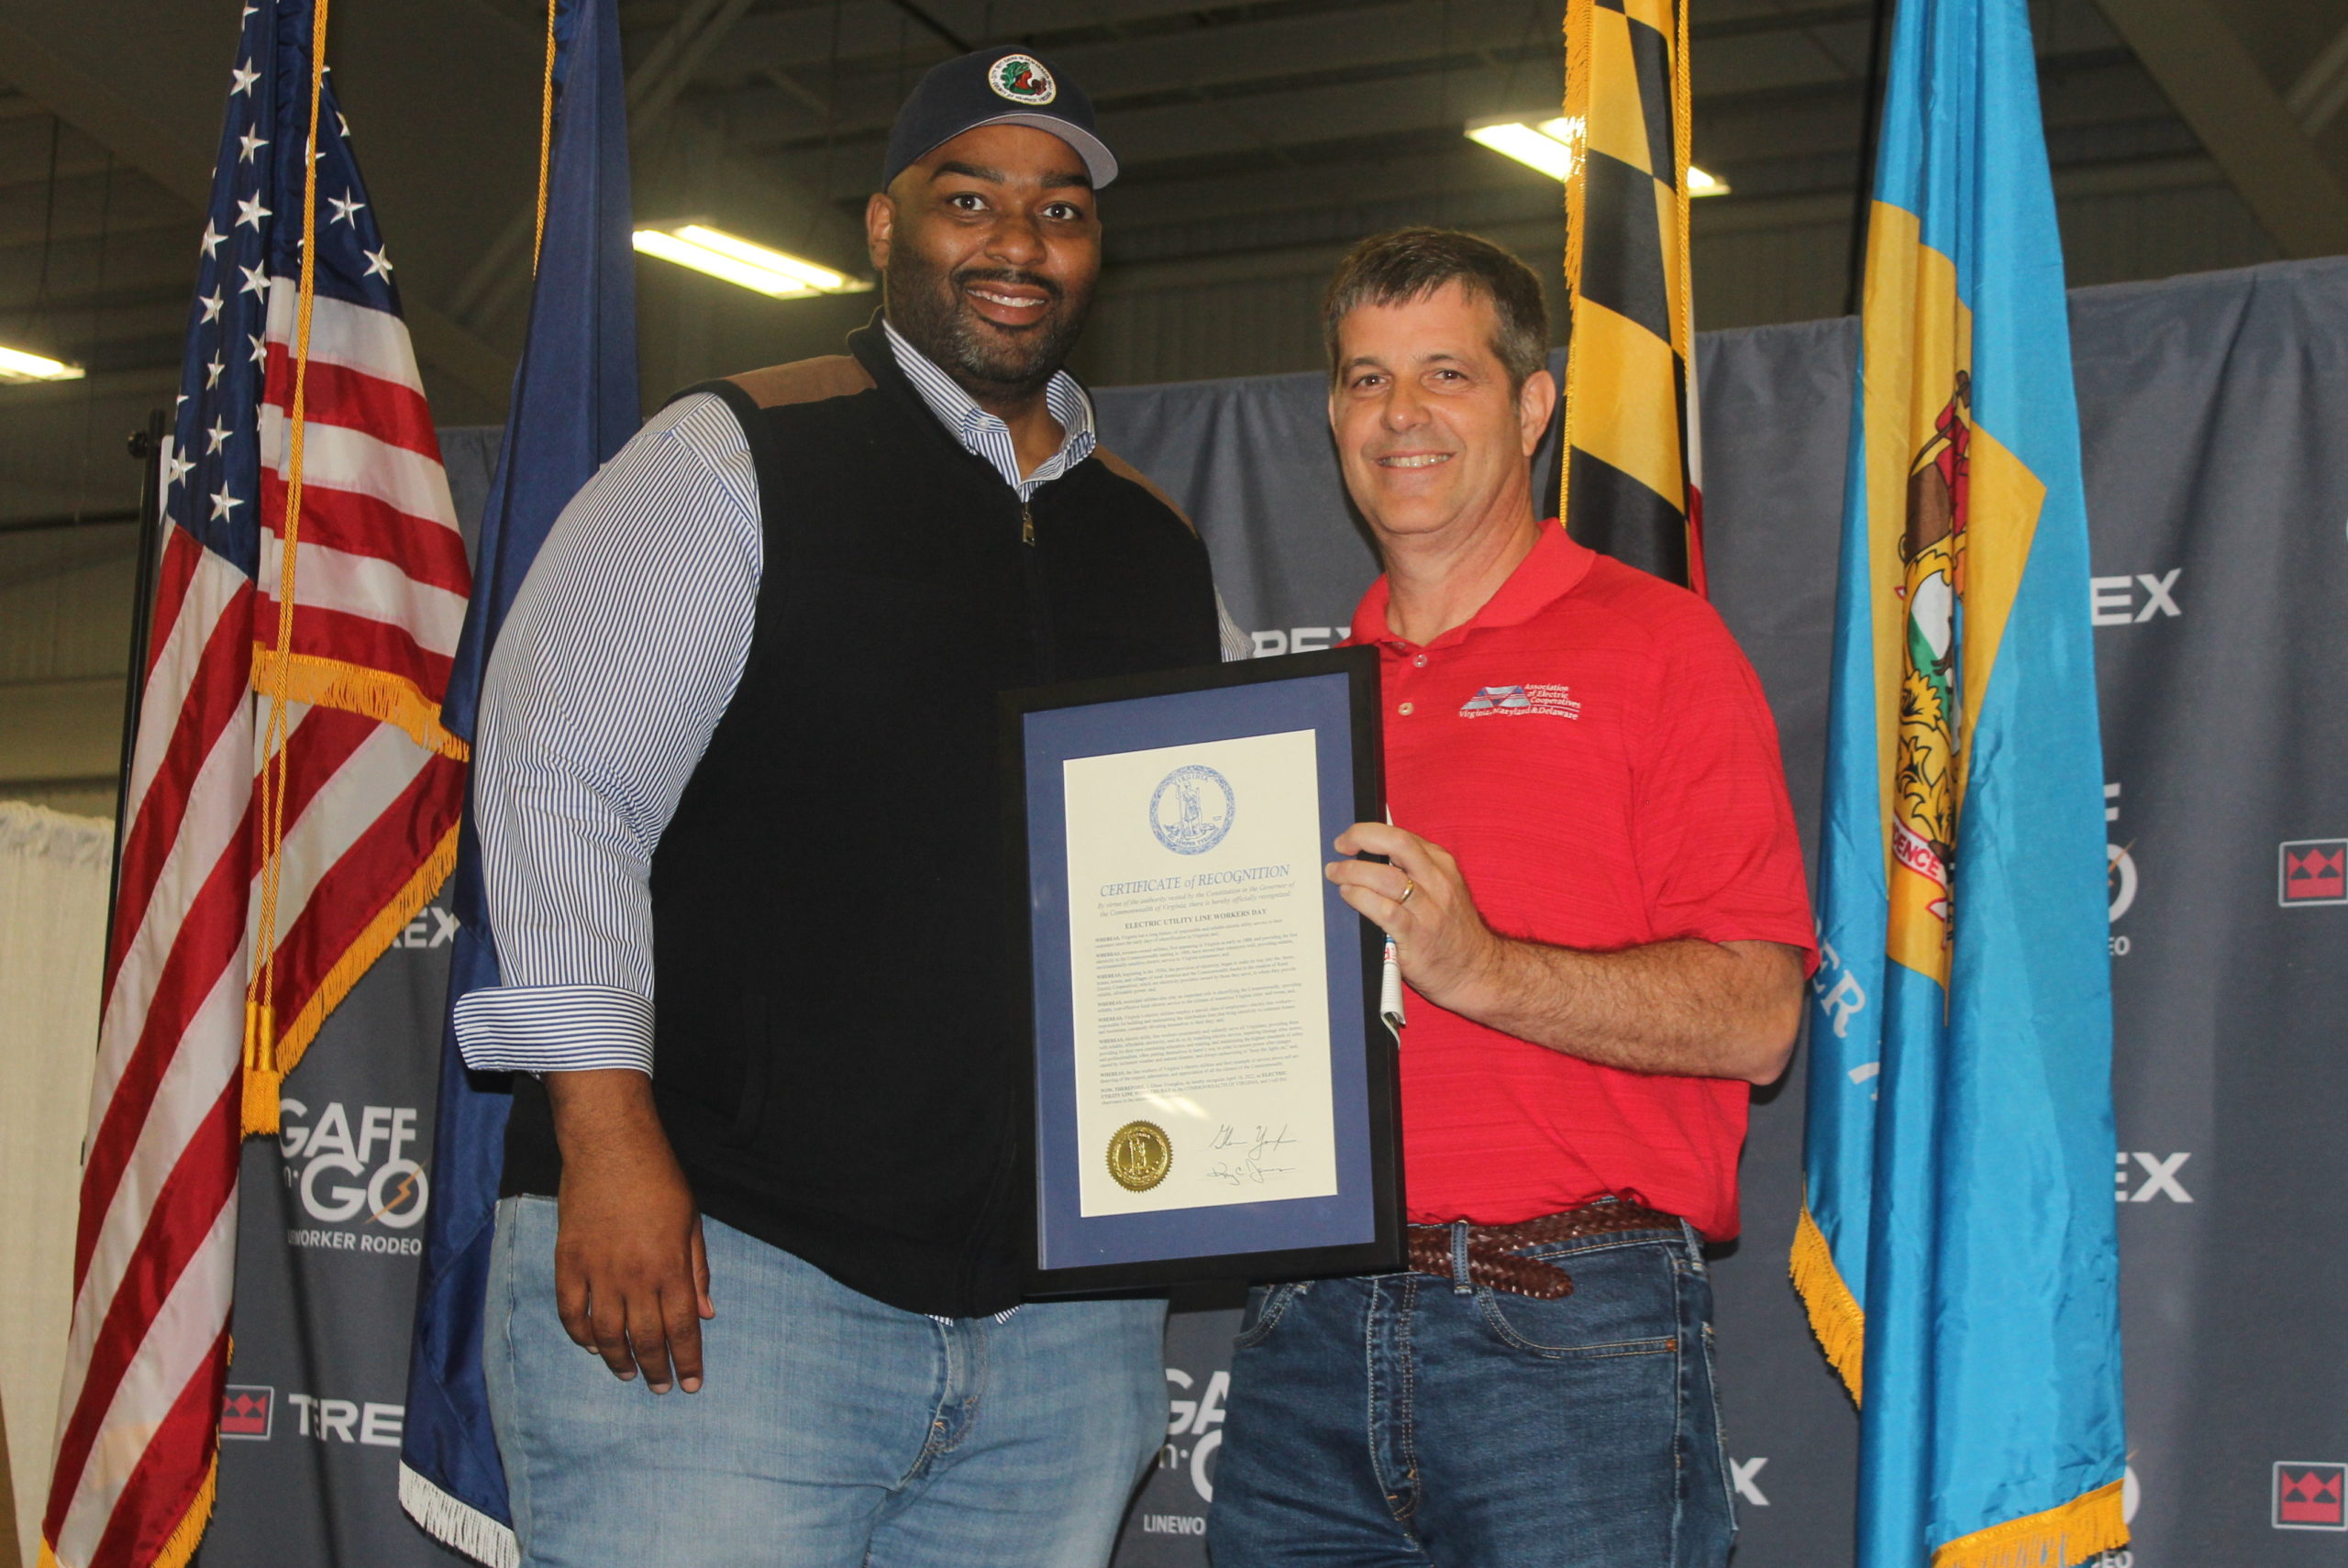 During the opening ceremony, Delegate Lamont Bagby presents the Governor’s Proclamation of Utility Lineworker Day in Virginia to Brian Mosier, President & CEO of VMDAEC.